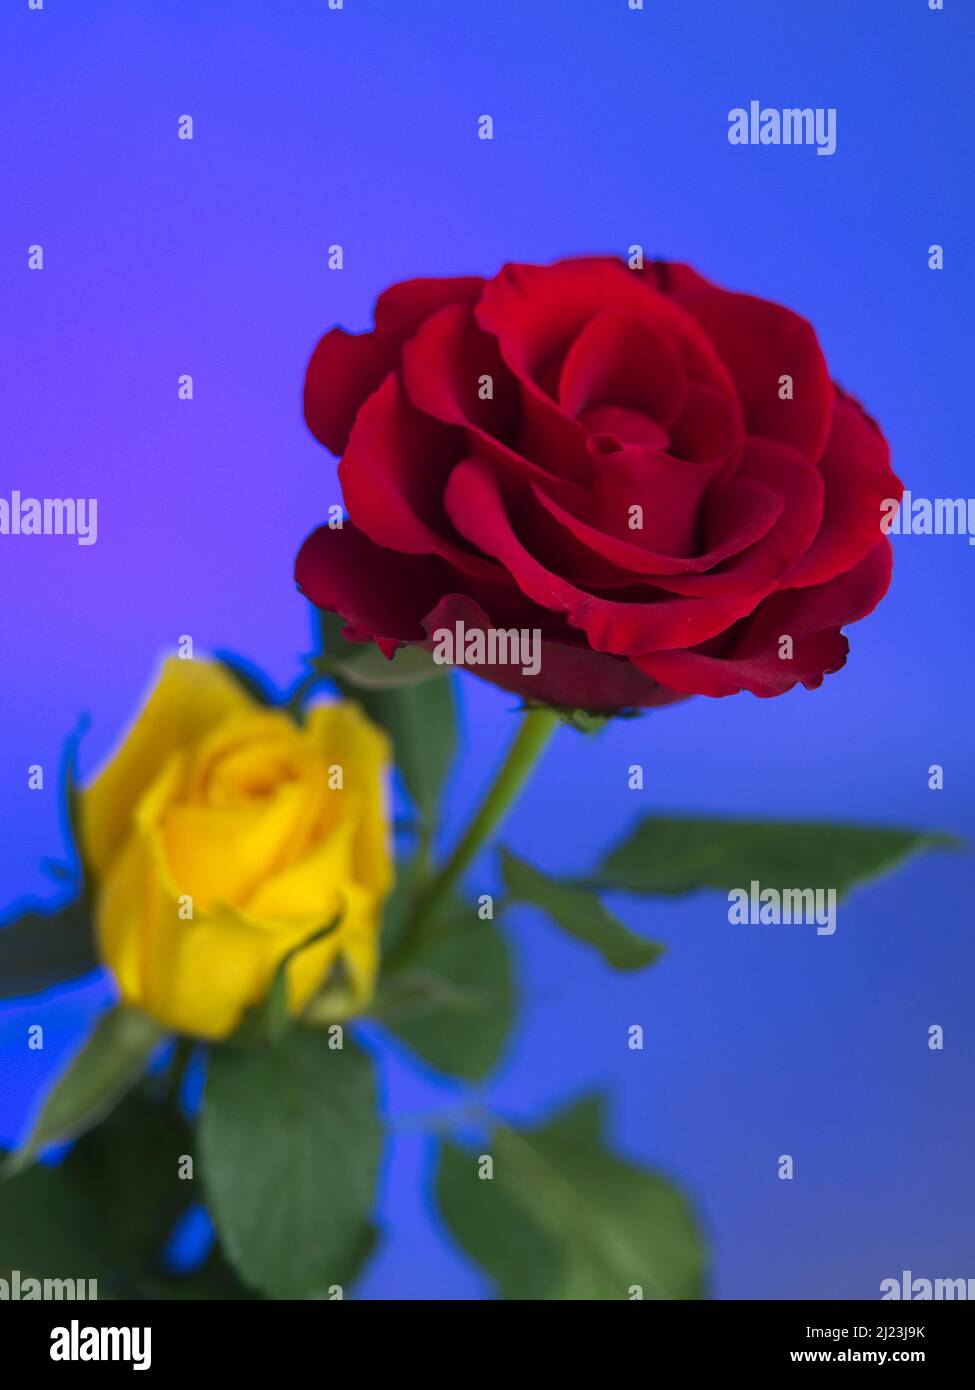 Red and Yellow rose on blue and purple background Stock Photo